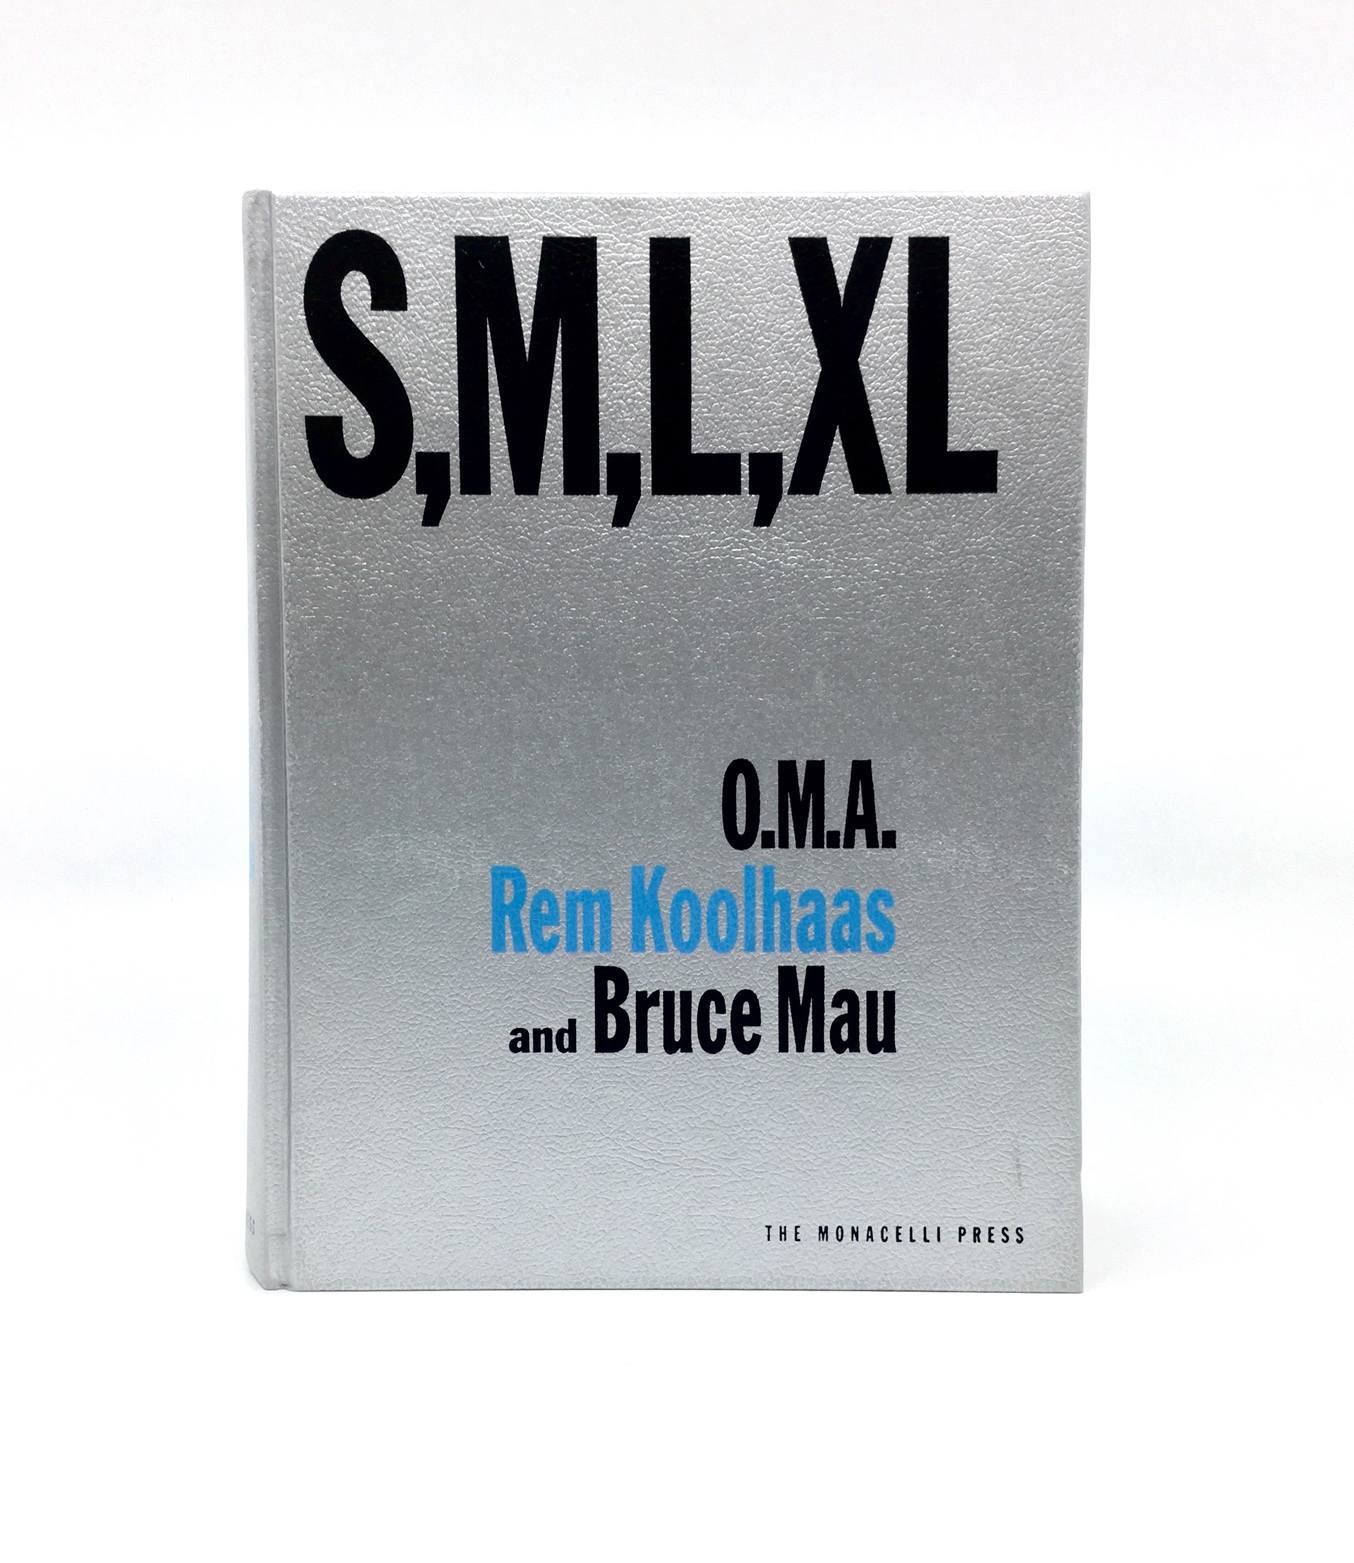 O.M.A. Rem Koolhaas and Bruce Mau - S,M,L,XL - published by The Monacelli Press